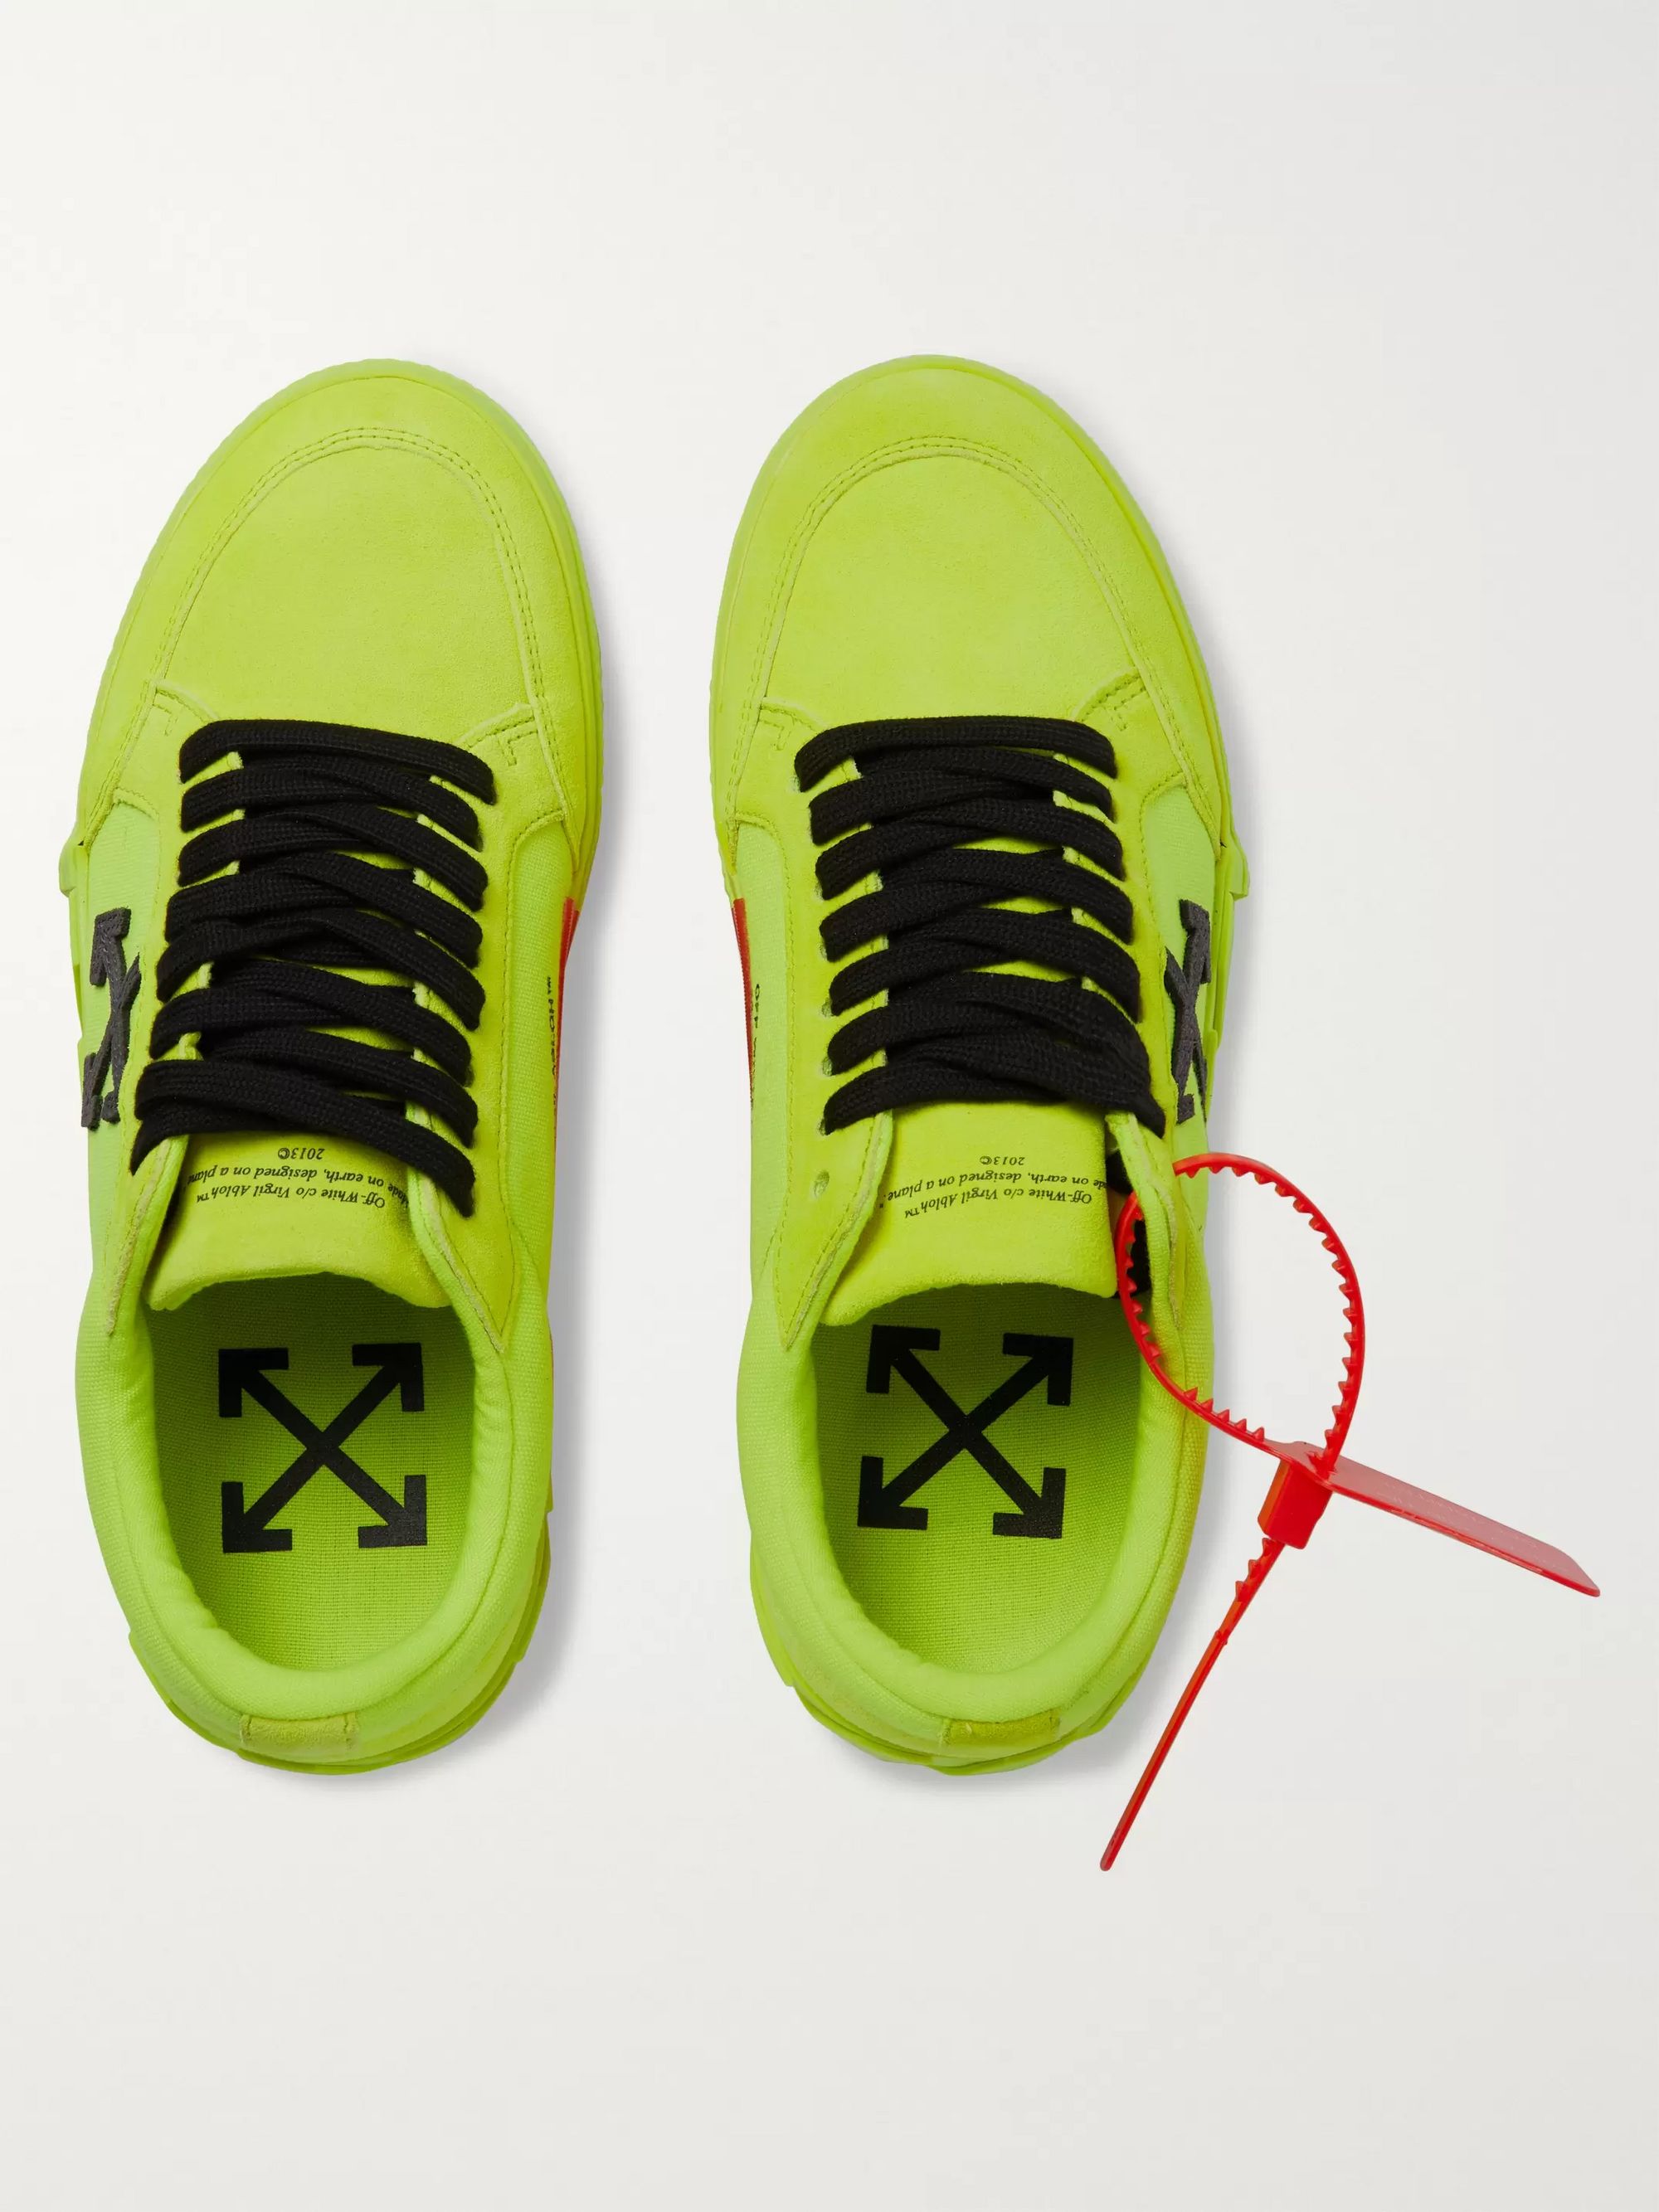 neon off white shoes